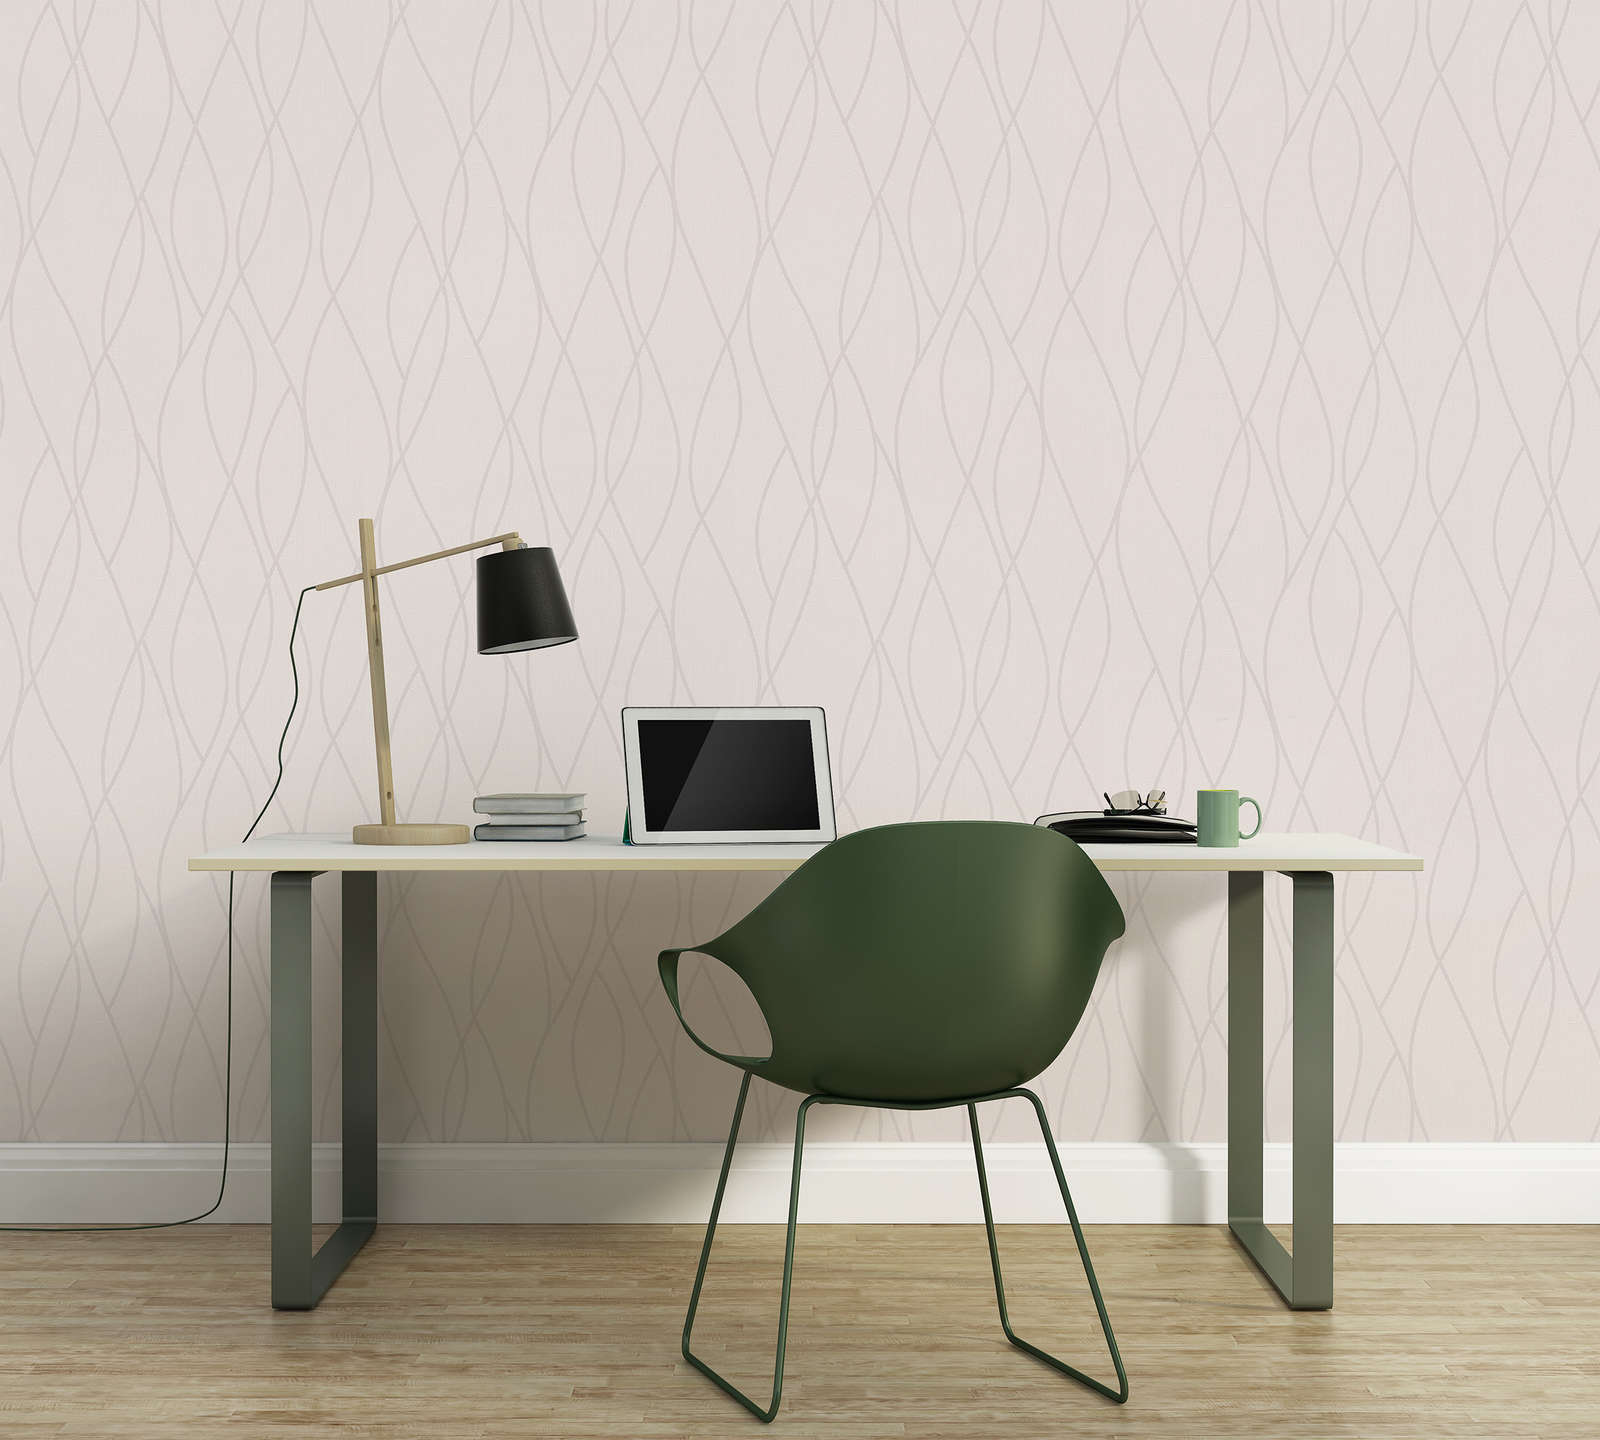             Plain wallpaper with graphic line pattern - white
        